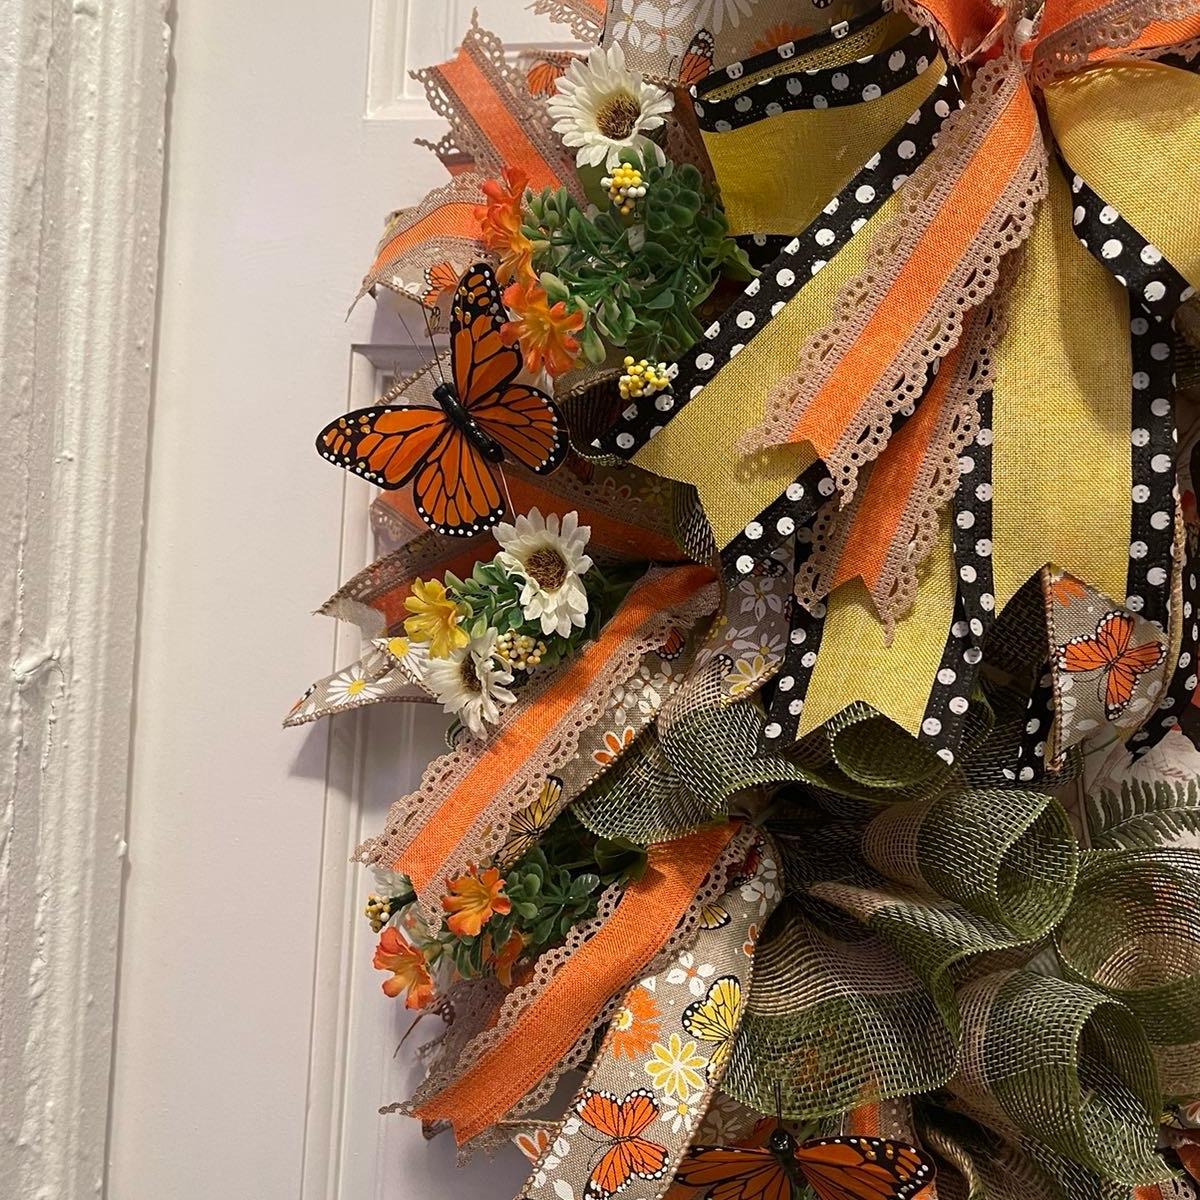 Butterfly Wreath for Front Door, Butterfly Wreath for Spring, Floral Wreath